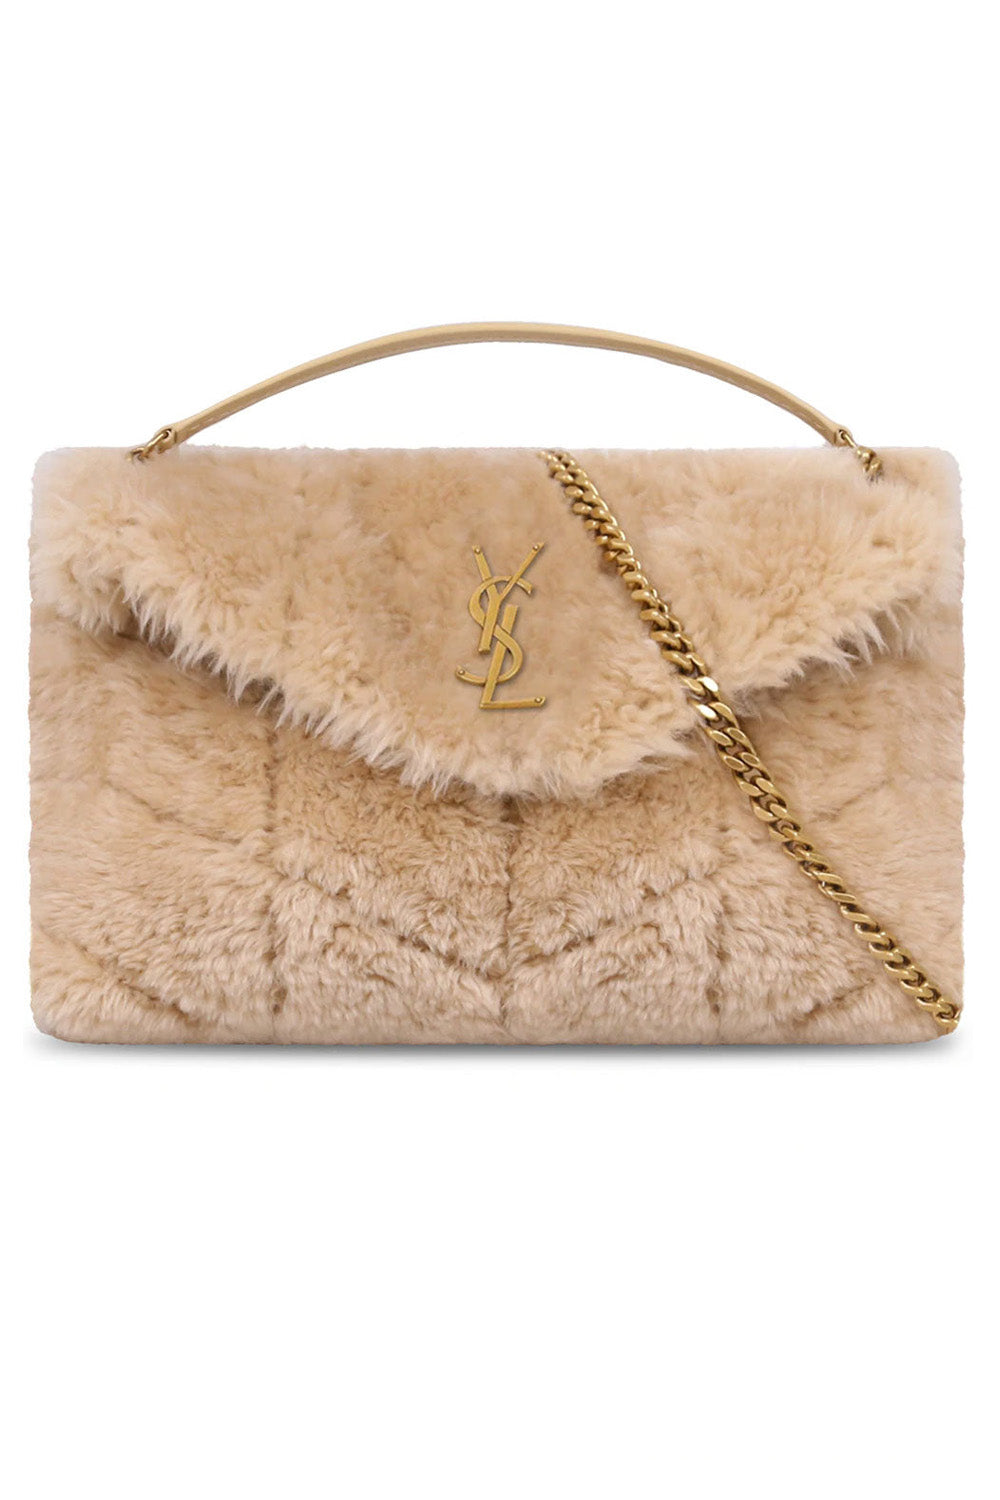 Saint Laurent Beige Quilted Toy Loulou Strap Bag in Natural